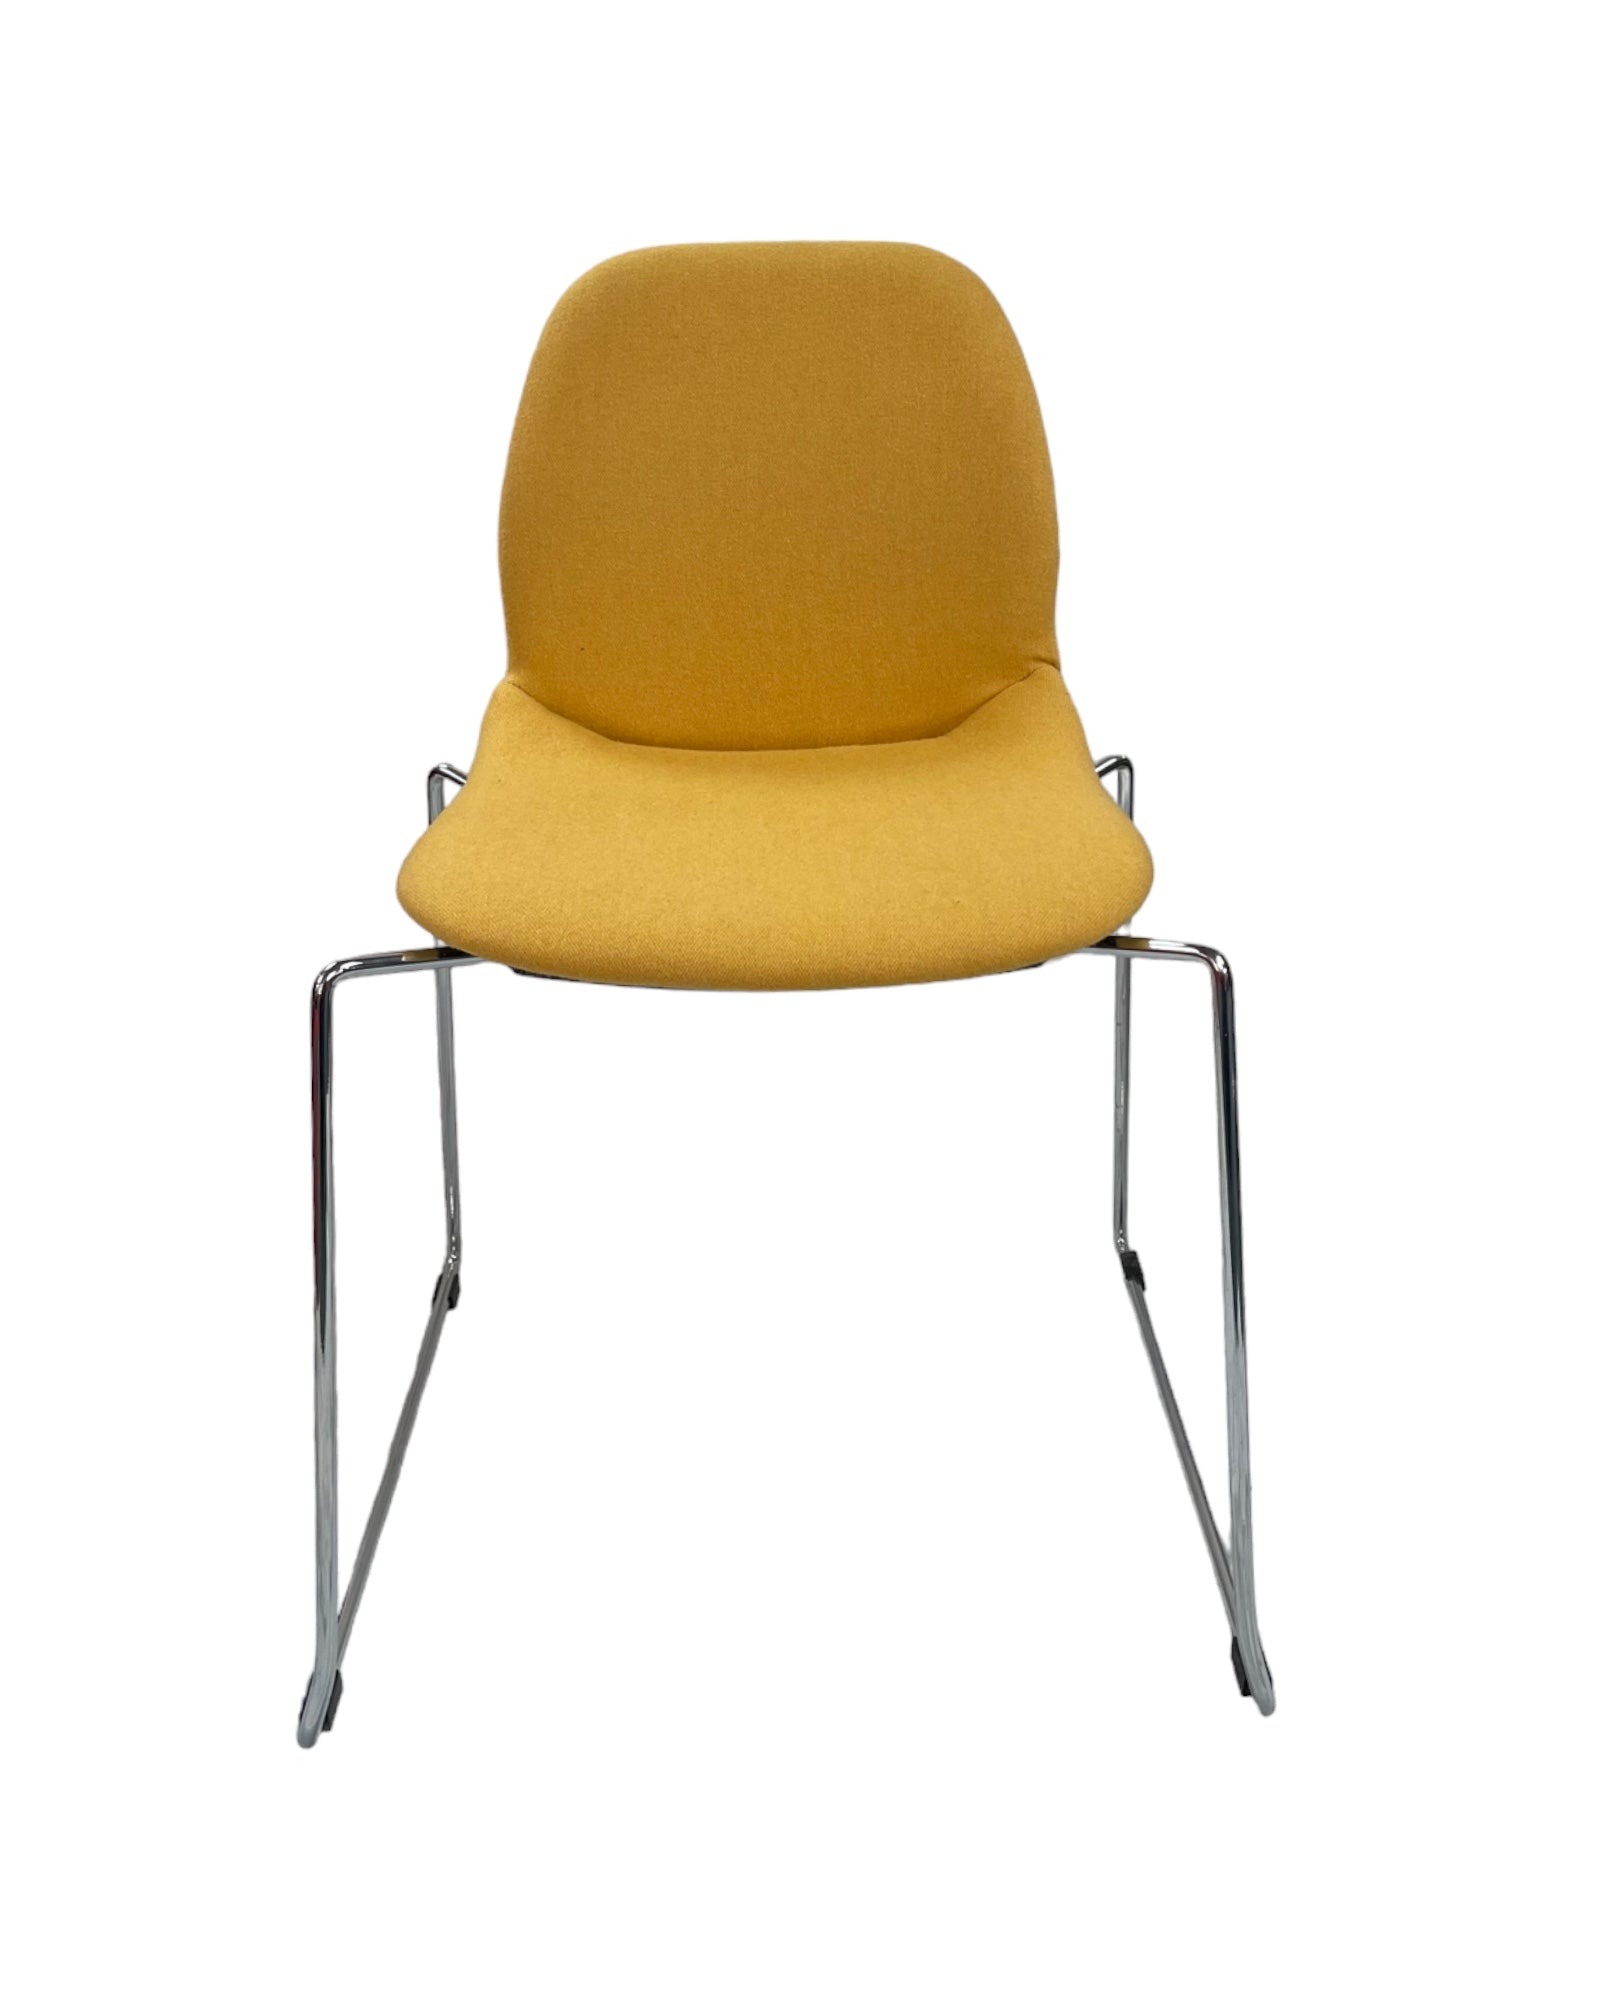 Shoreditch Cantilever Upholstered Canteen Chair